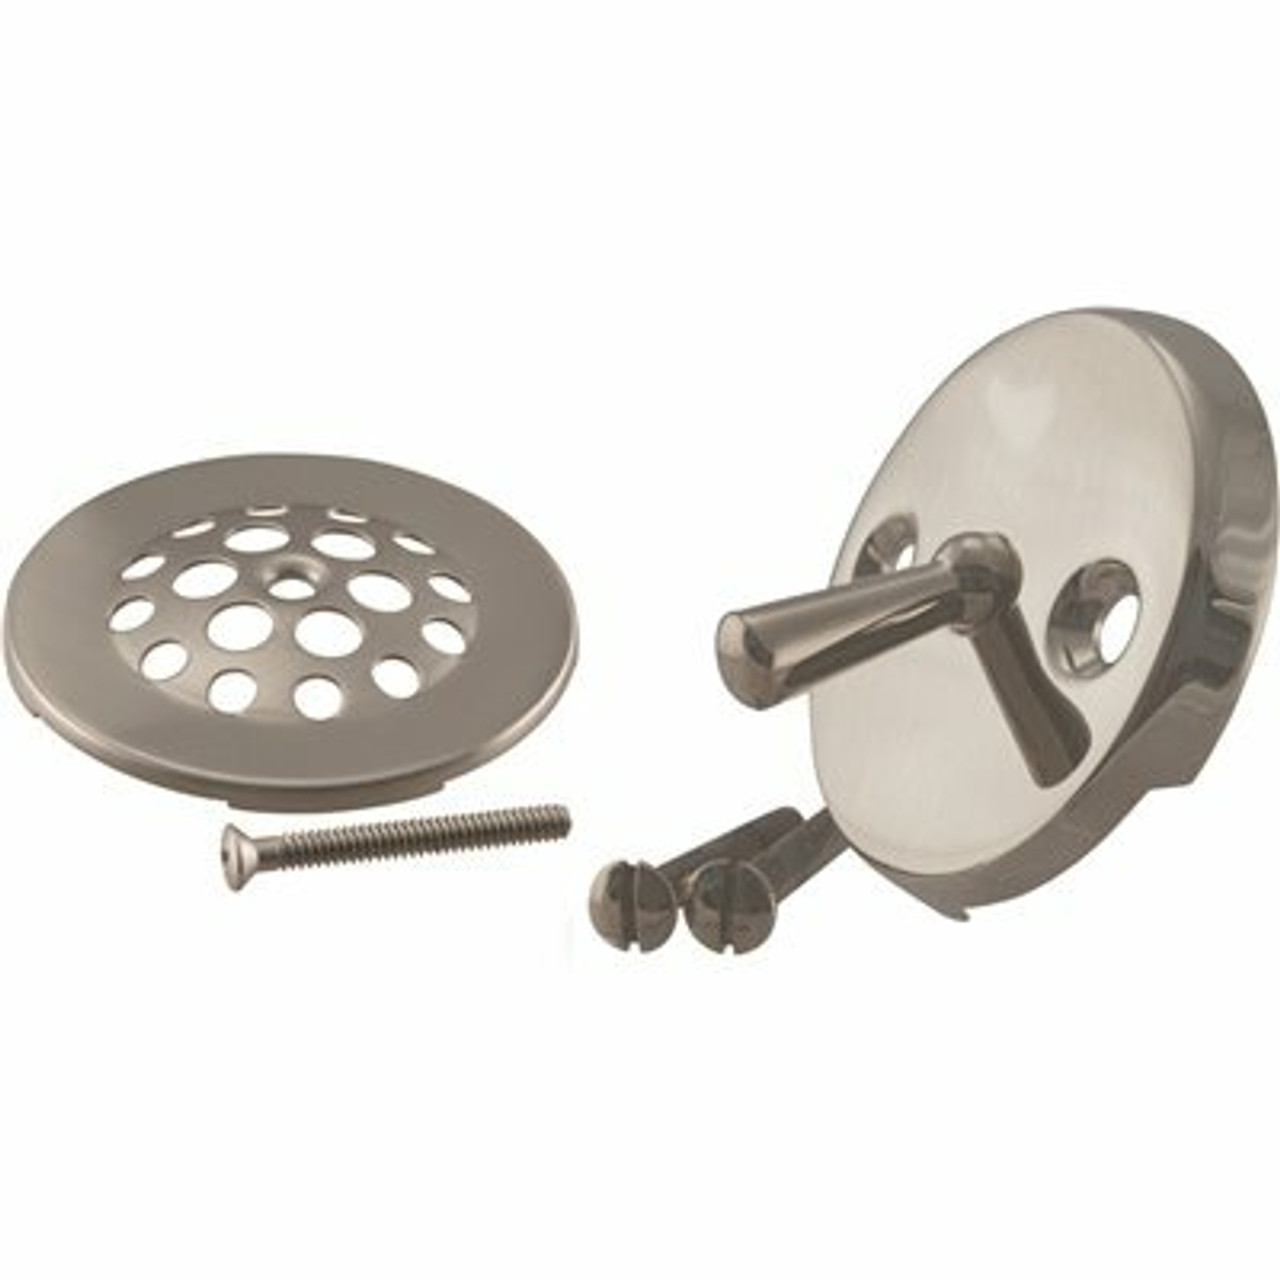 Westbrass Trip Lever Overflow Faceplate With Beehive Drain Cover And Screws In Satin Nickel